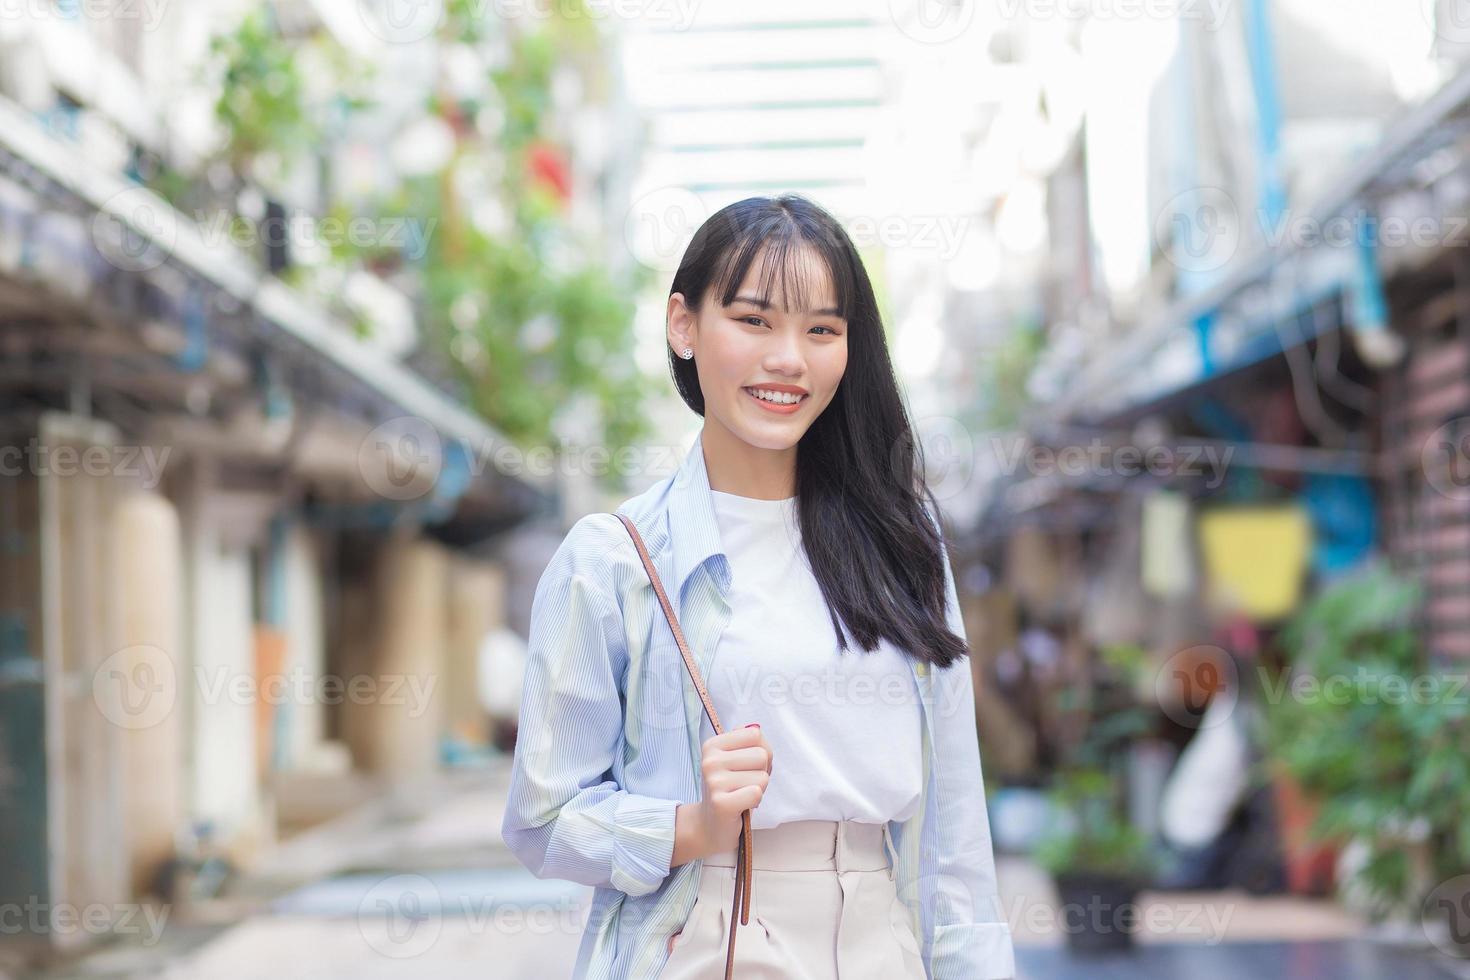 Confident young Asian woman who wears a blue white shirt and bag smiles happily and looks at the camera as she commute to work through the old town. photo